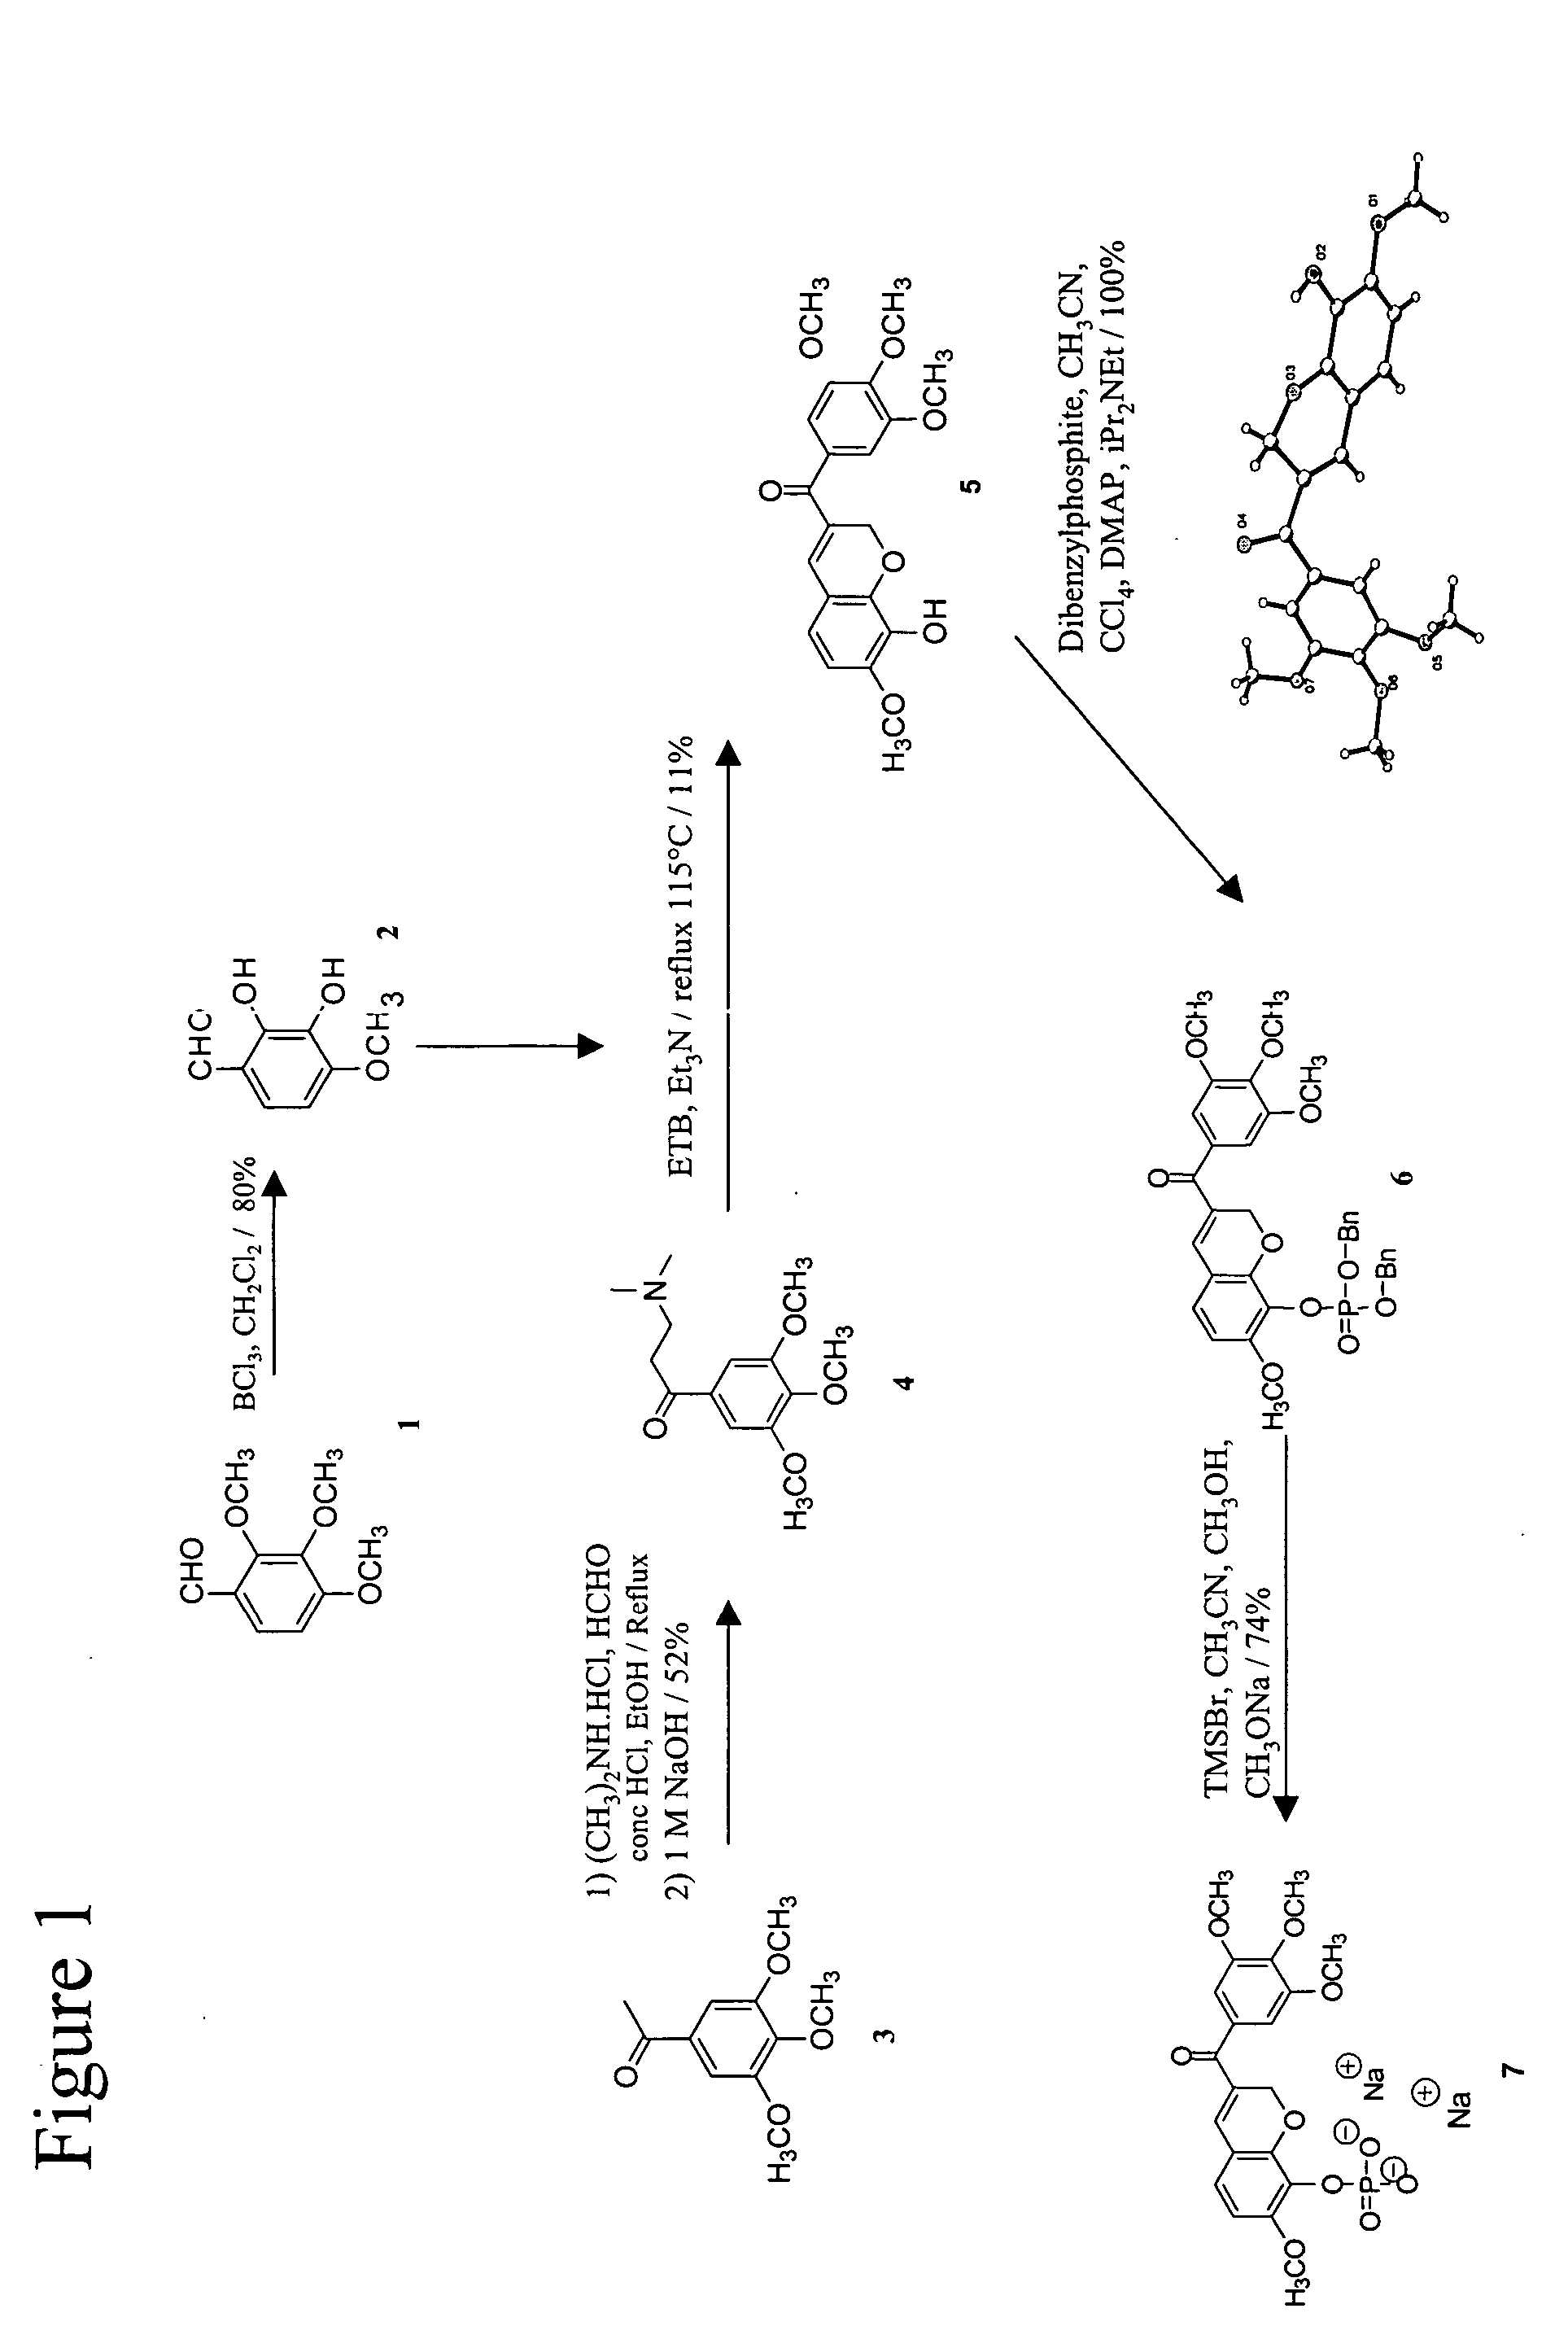 Chromene-containing compounds with anti-tubulin and vascular targeting activity